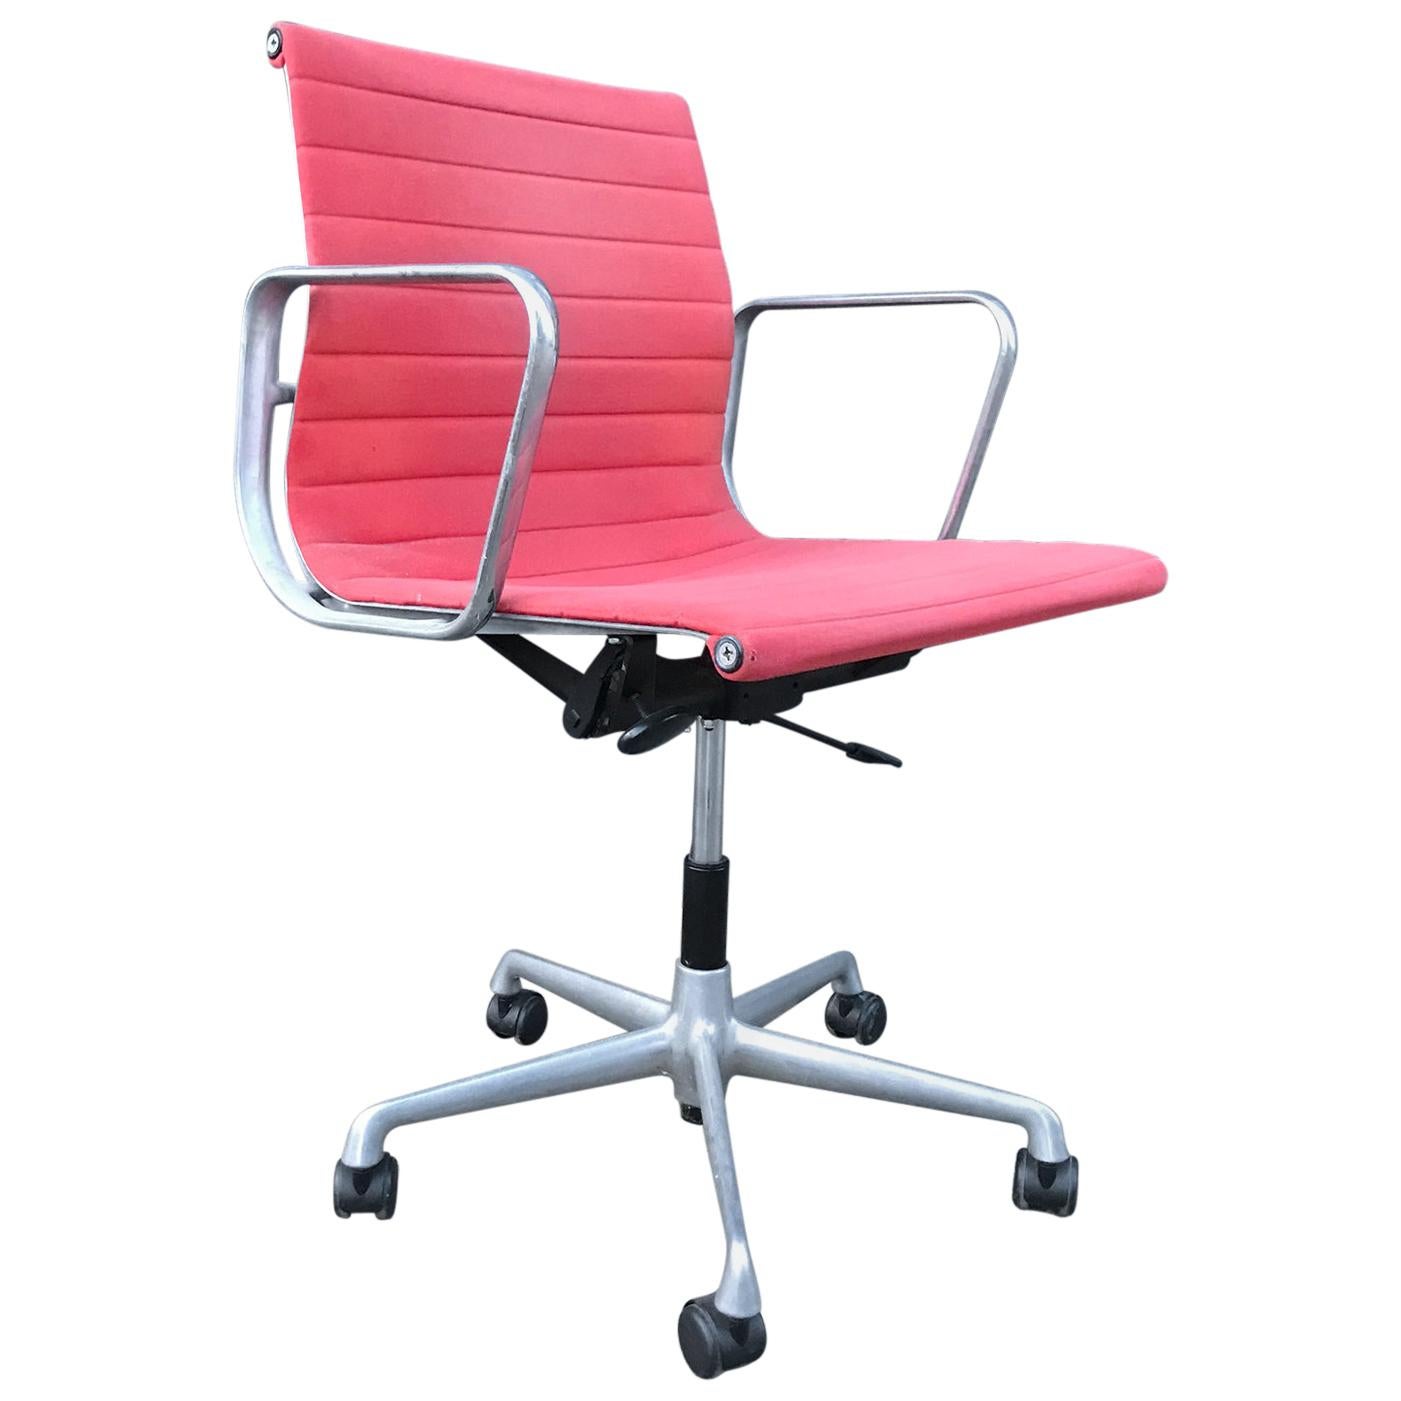 1958, Ray and Charles Eames Red Adjustable Tilt Office Chair with Five Wheels For Sale